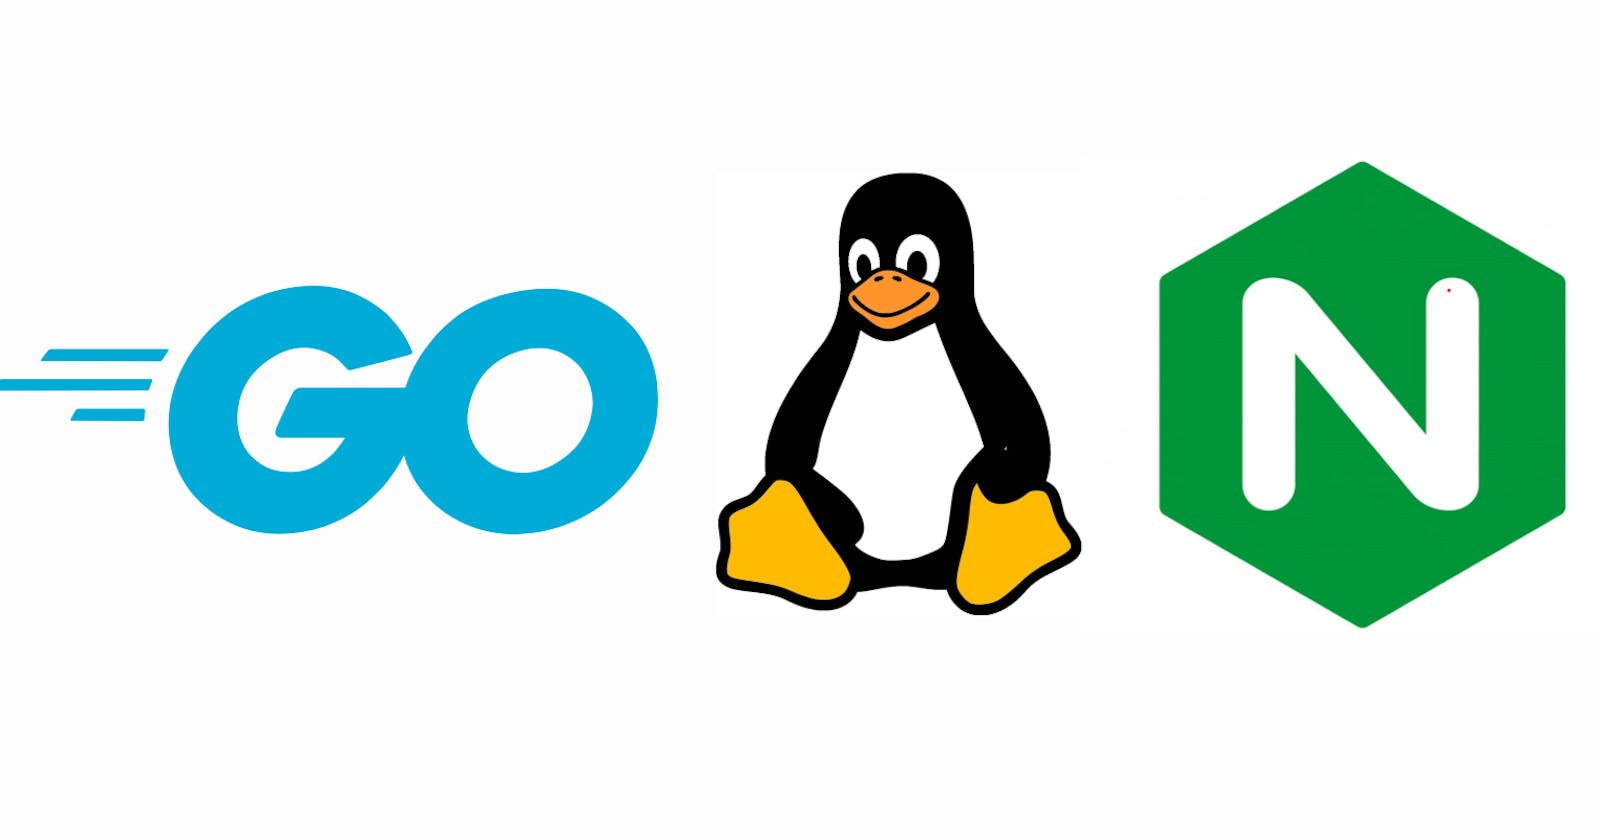 Deploy on Linux with Systemctl and Nginx